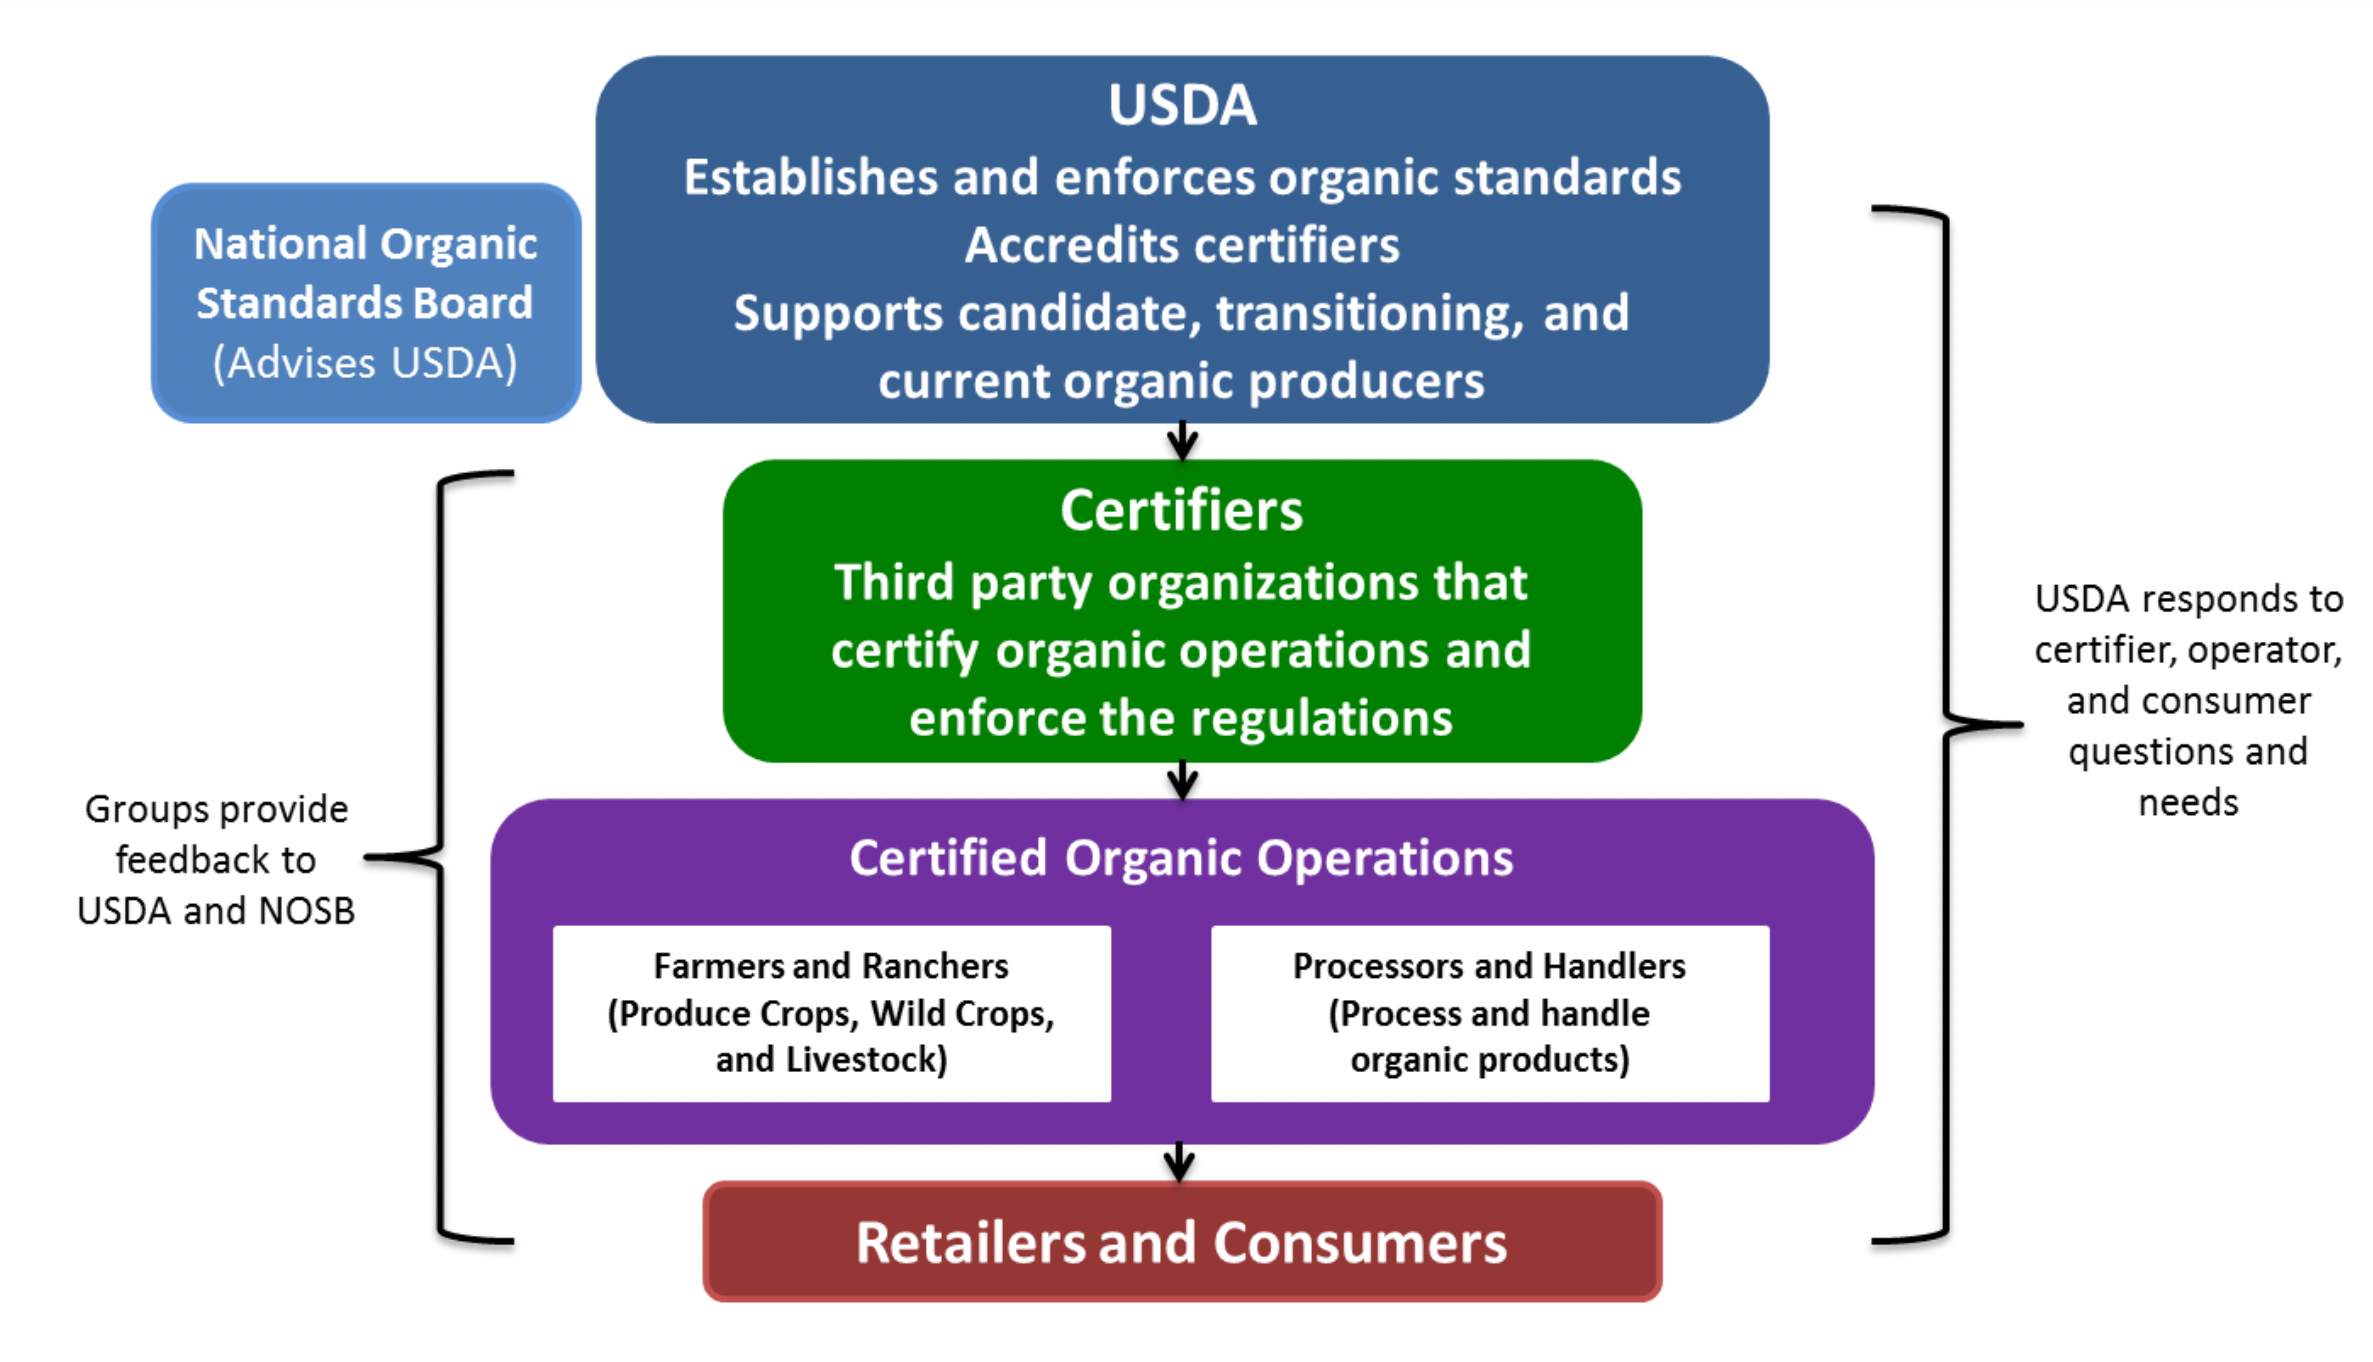 Diagram of the USDA organic program structure, as described above in the text.